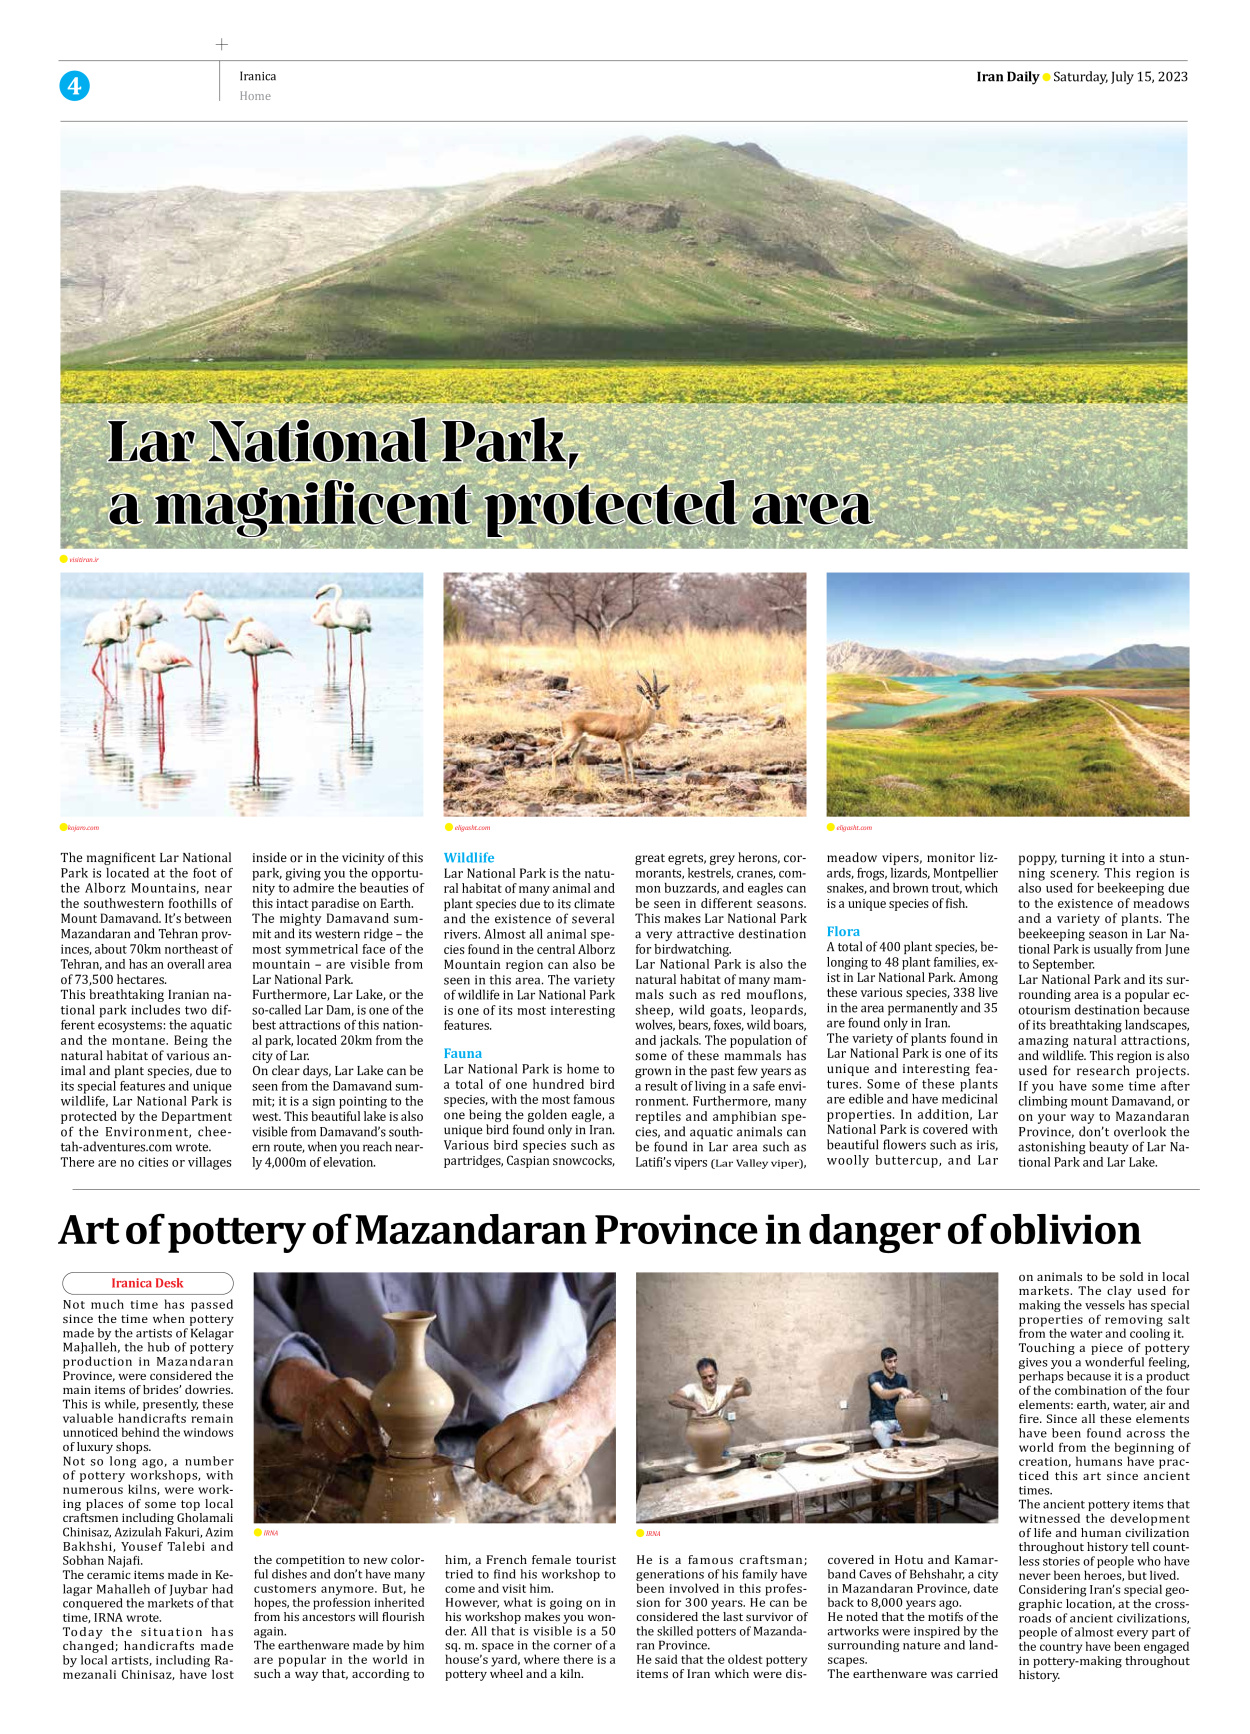 Iran Daily - Number Seven Thousand Three Hundred and Thirty Nine - 15 July 2023 - Page 4